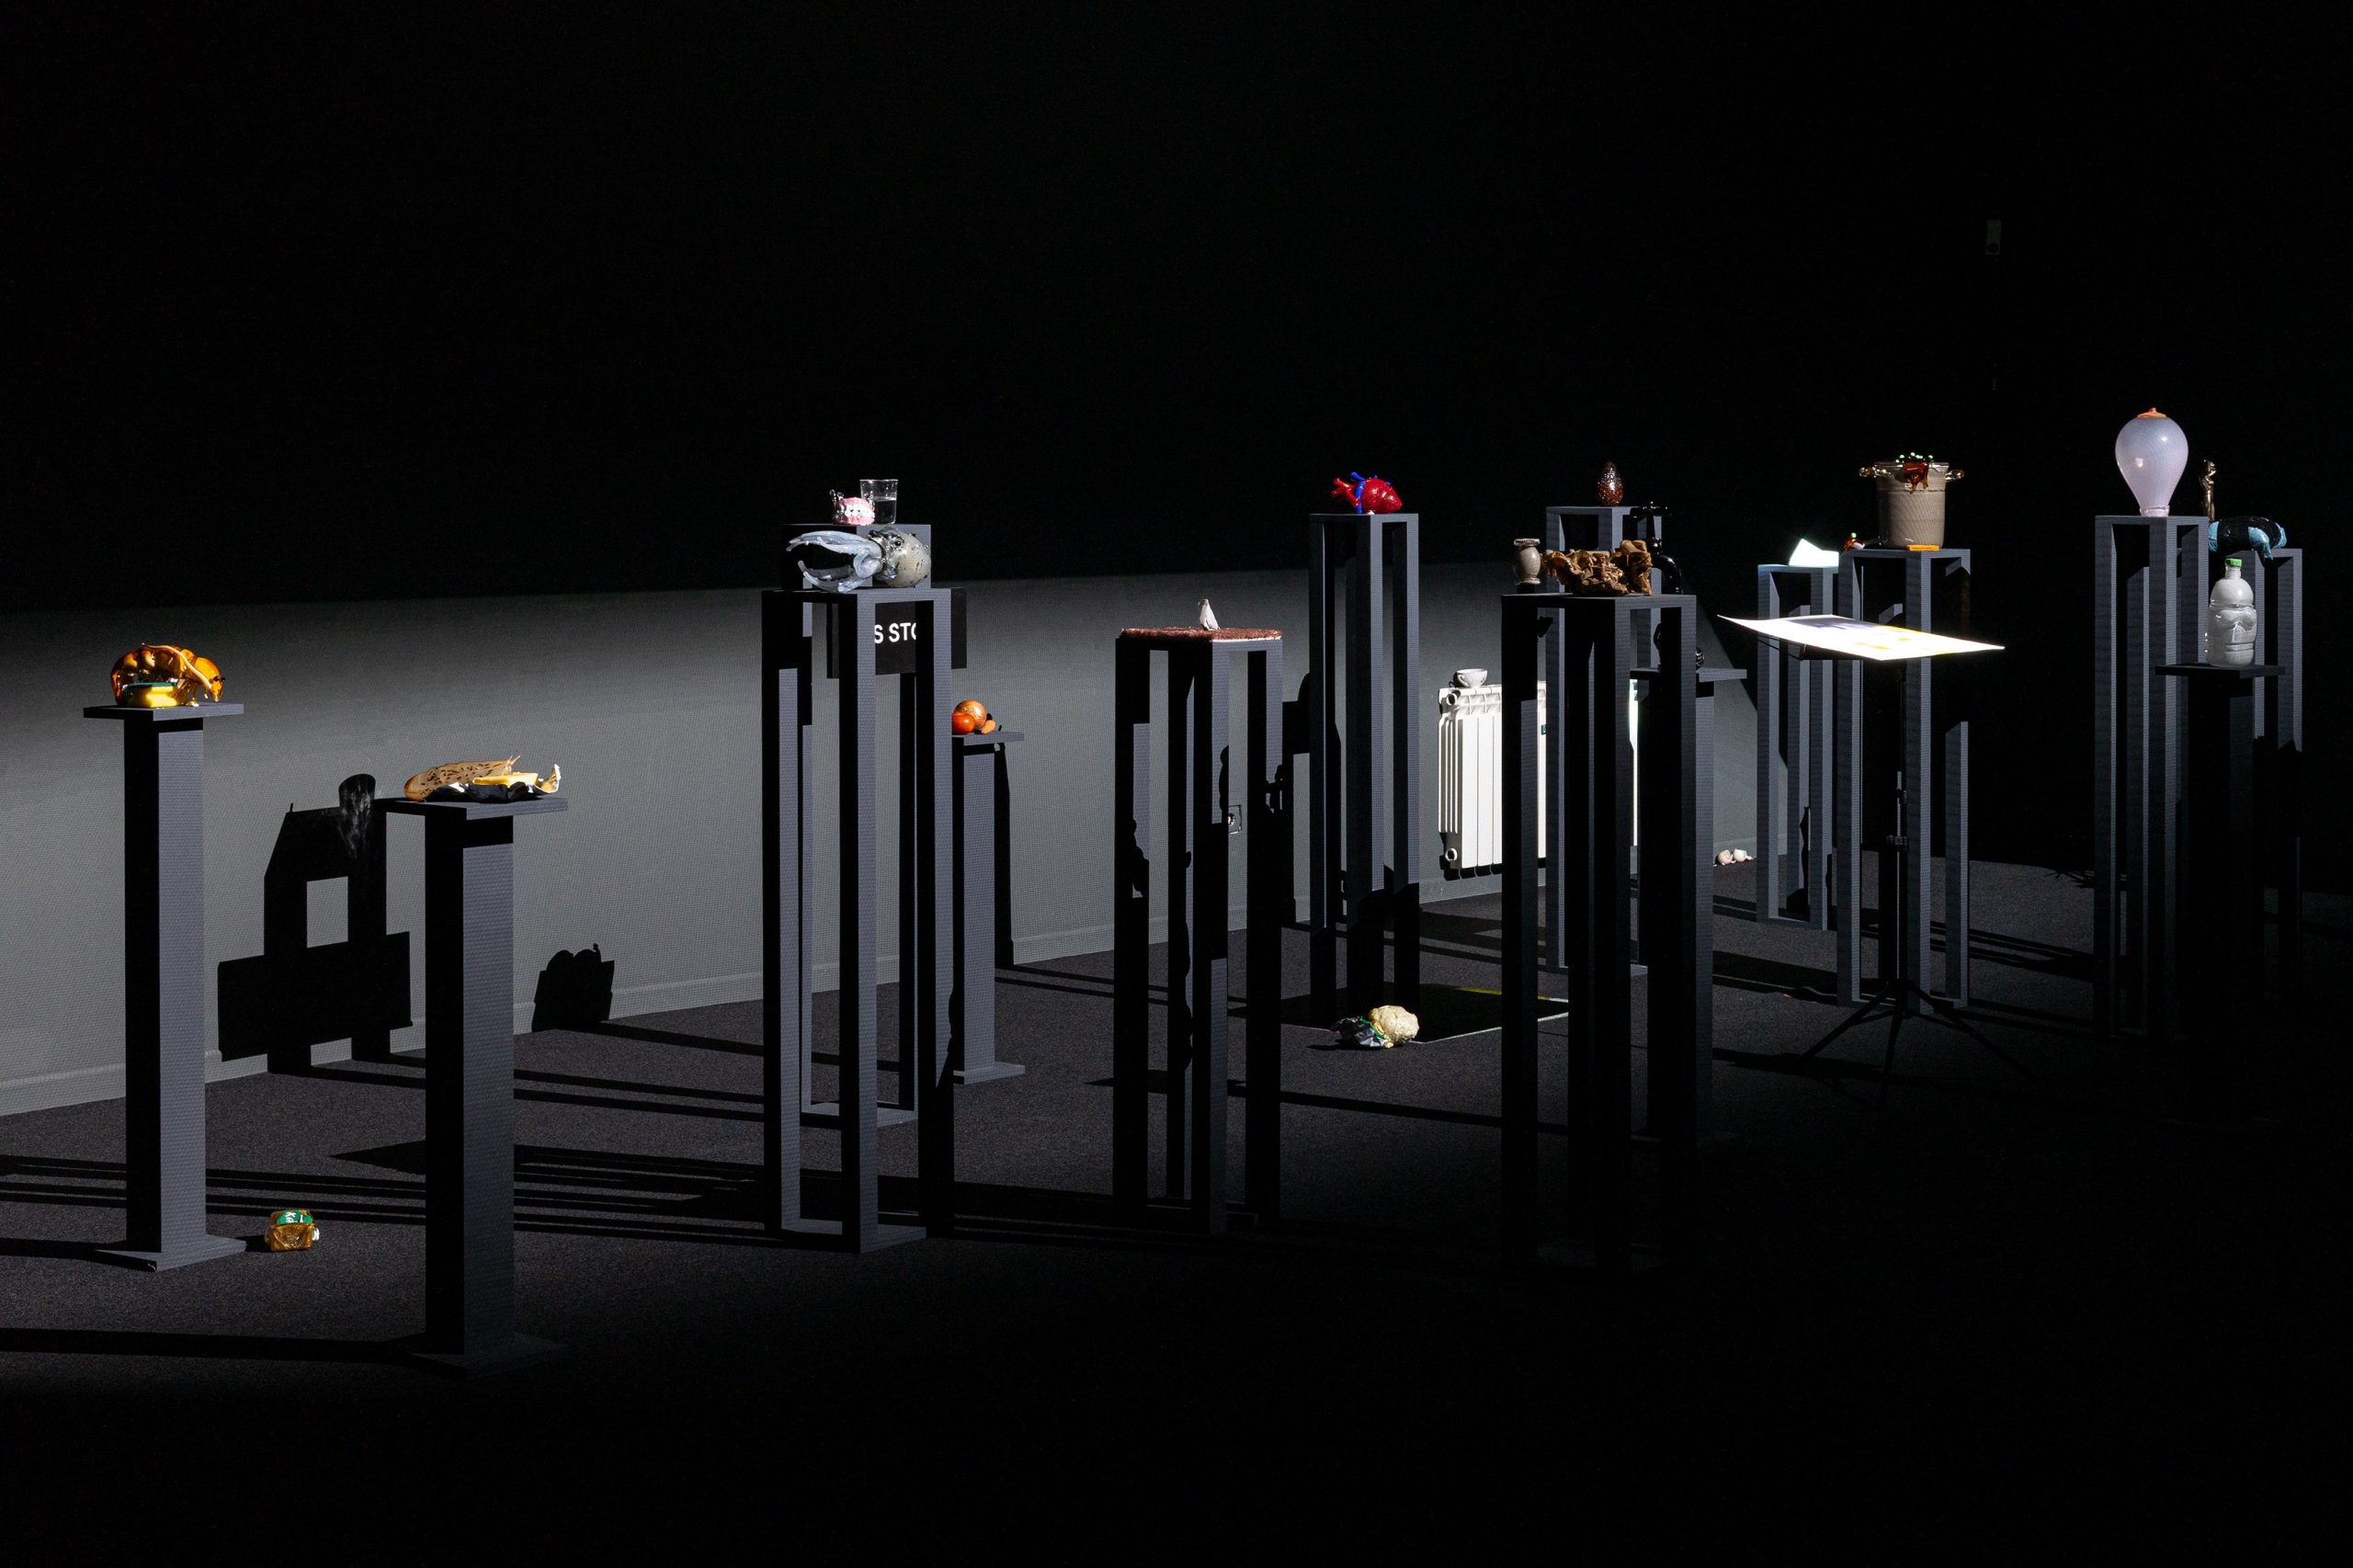 A grouping of tall, narrow black platforms hold various objects, including fruits and vegetables, a model heart and dentures. They are displayed in a black room and are illuminated by lights off camera.